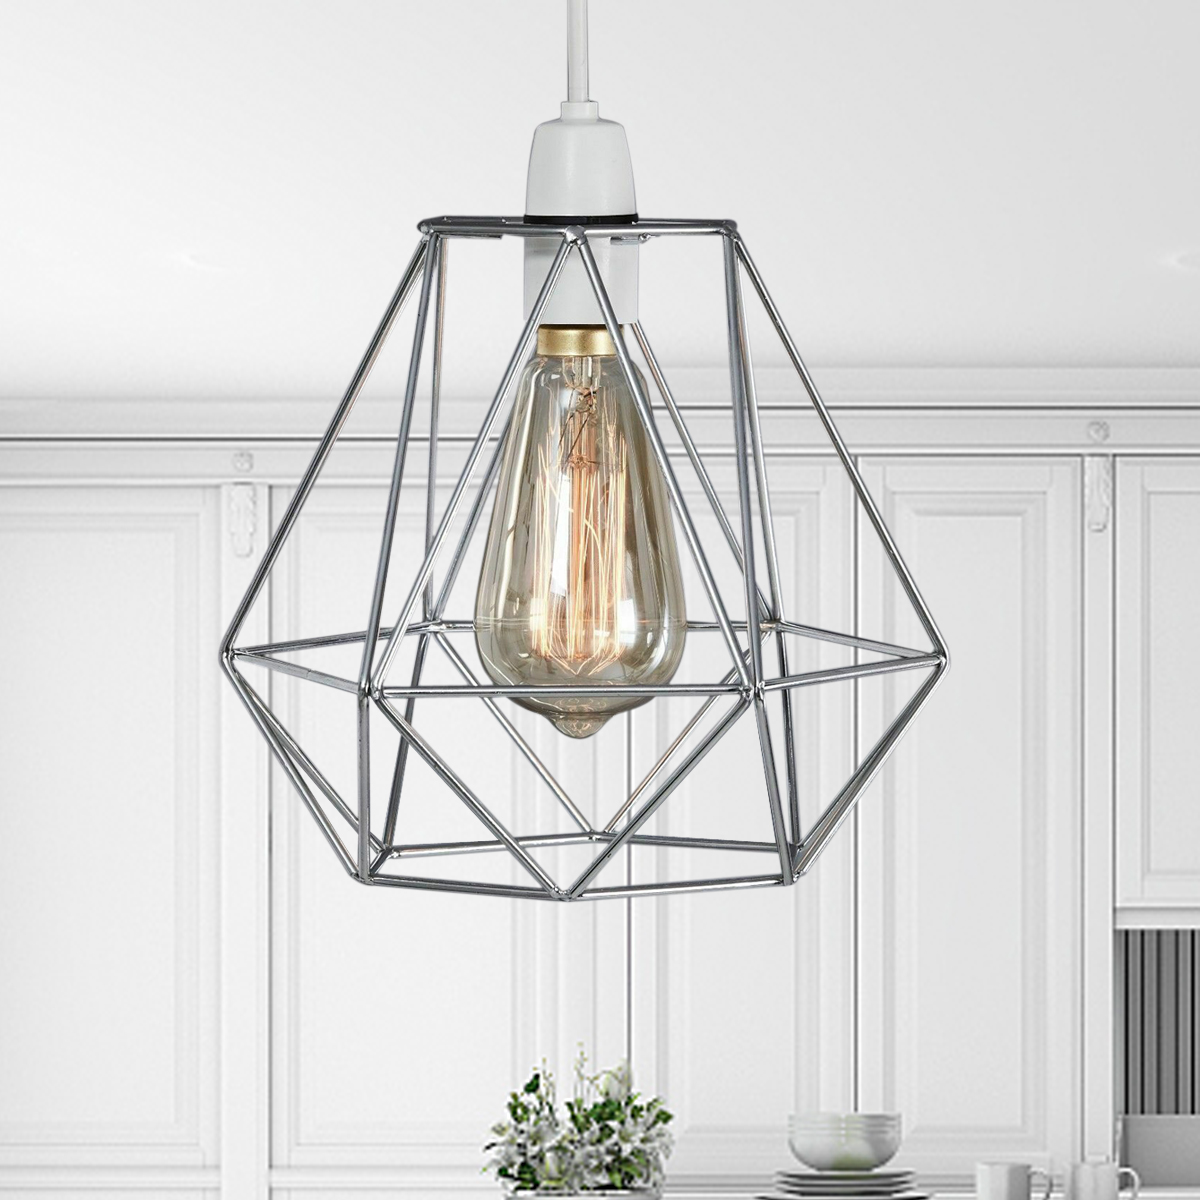 Geometric Wire Ceiling Pendant Light /Lamp Shade Metal Cage Kitchen Dining 